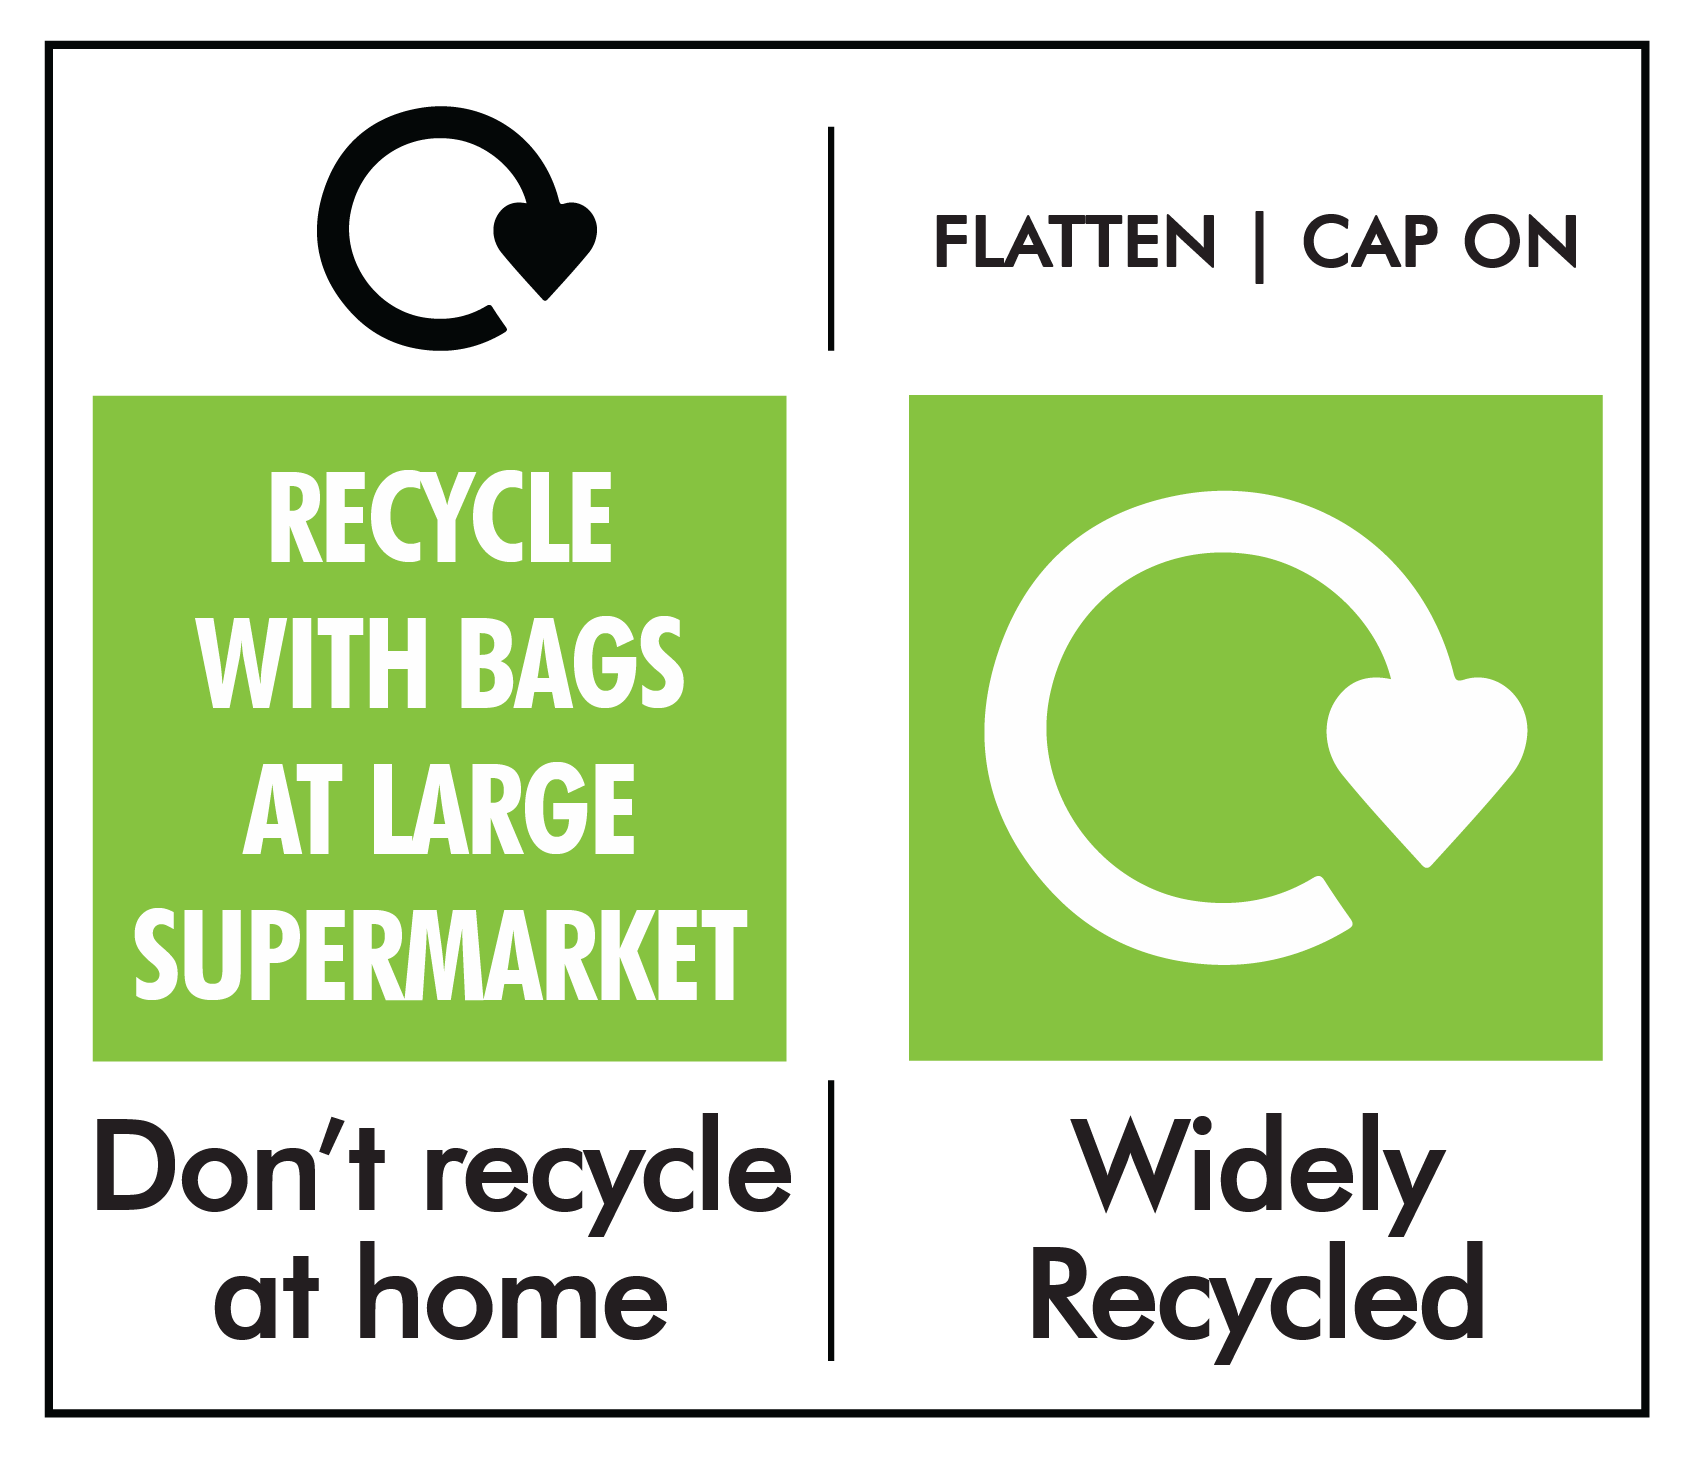 Recycle with bag in large supermarket